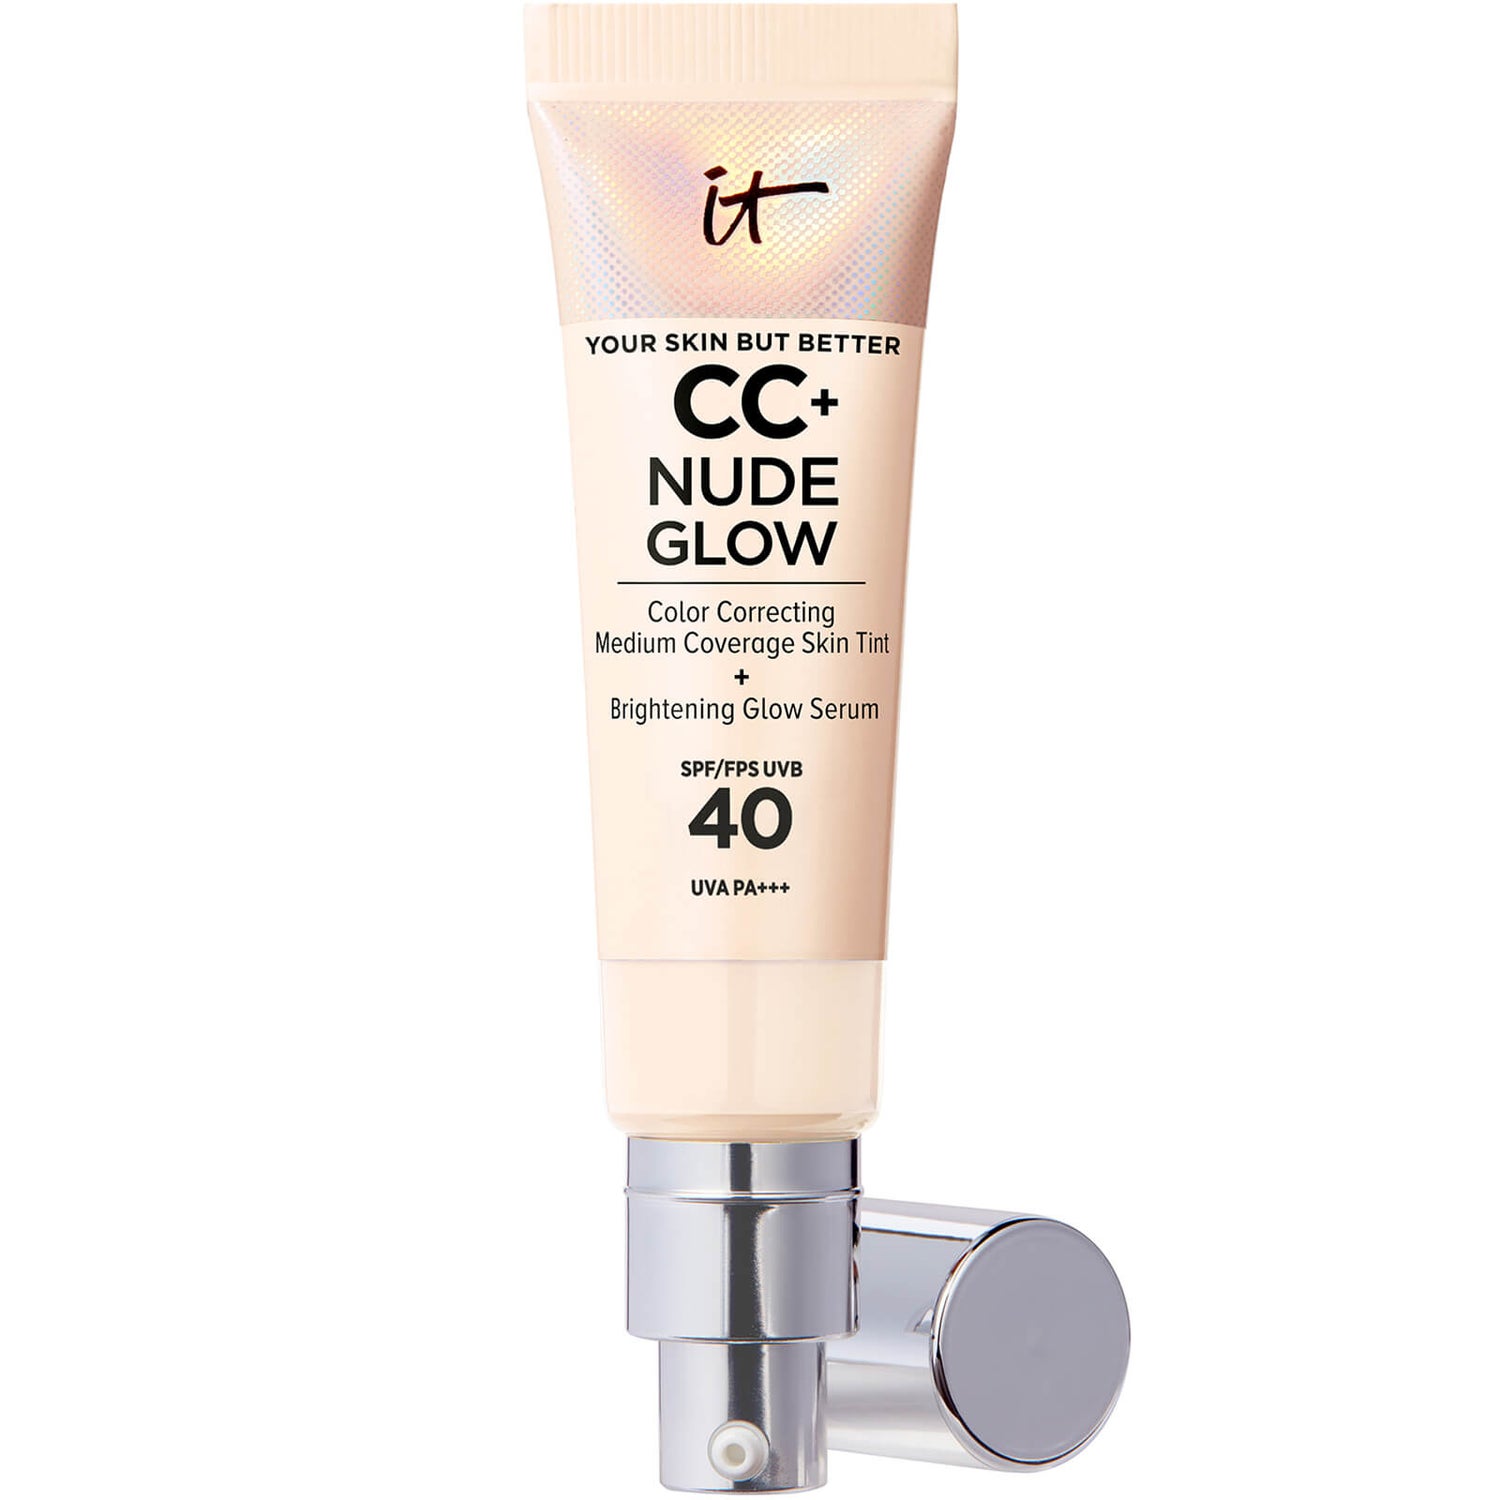 IT Cosmetics CC+ and Nude Glow Lightweight Foundation and Glow Serum with SPF40 32ml (Various Shades)